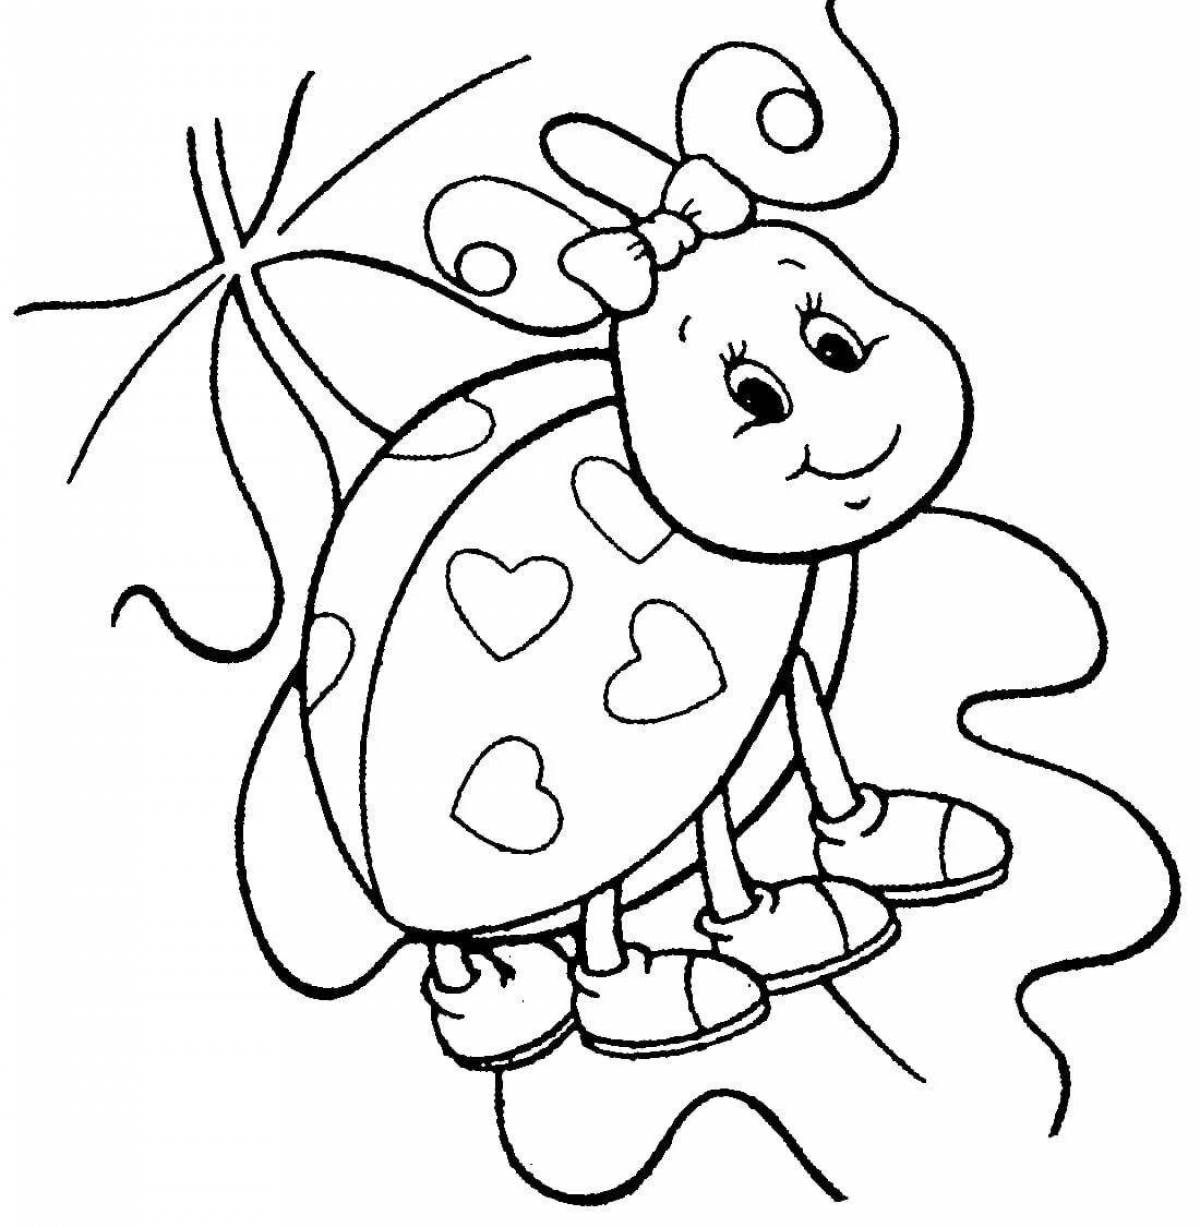 Drama coloring pages insects